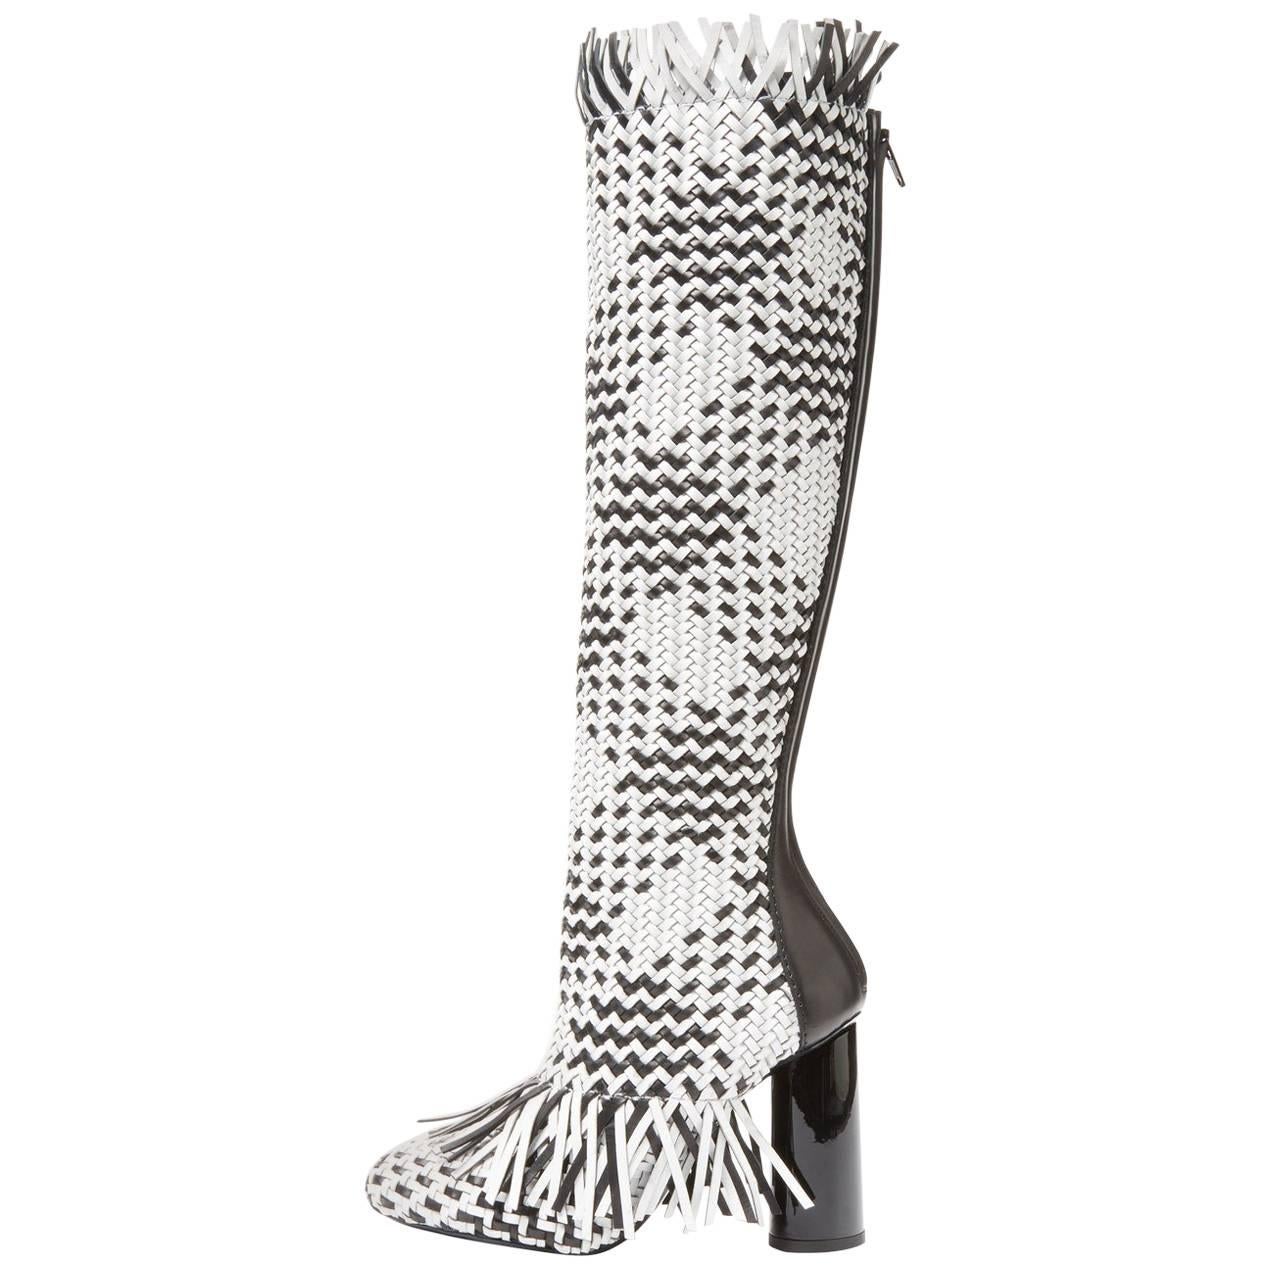 Proenza Schouler New Sold Out Black White Fringe Knee High Boots in Box